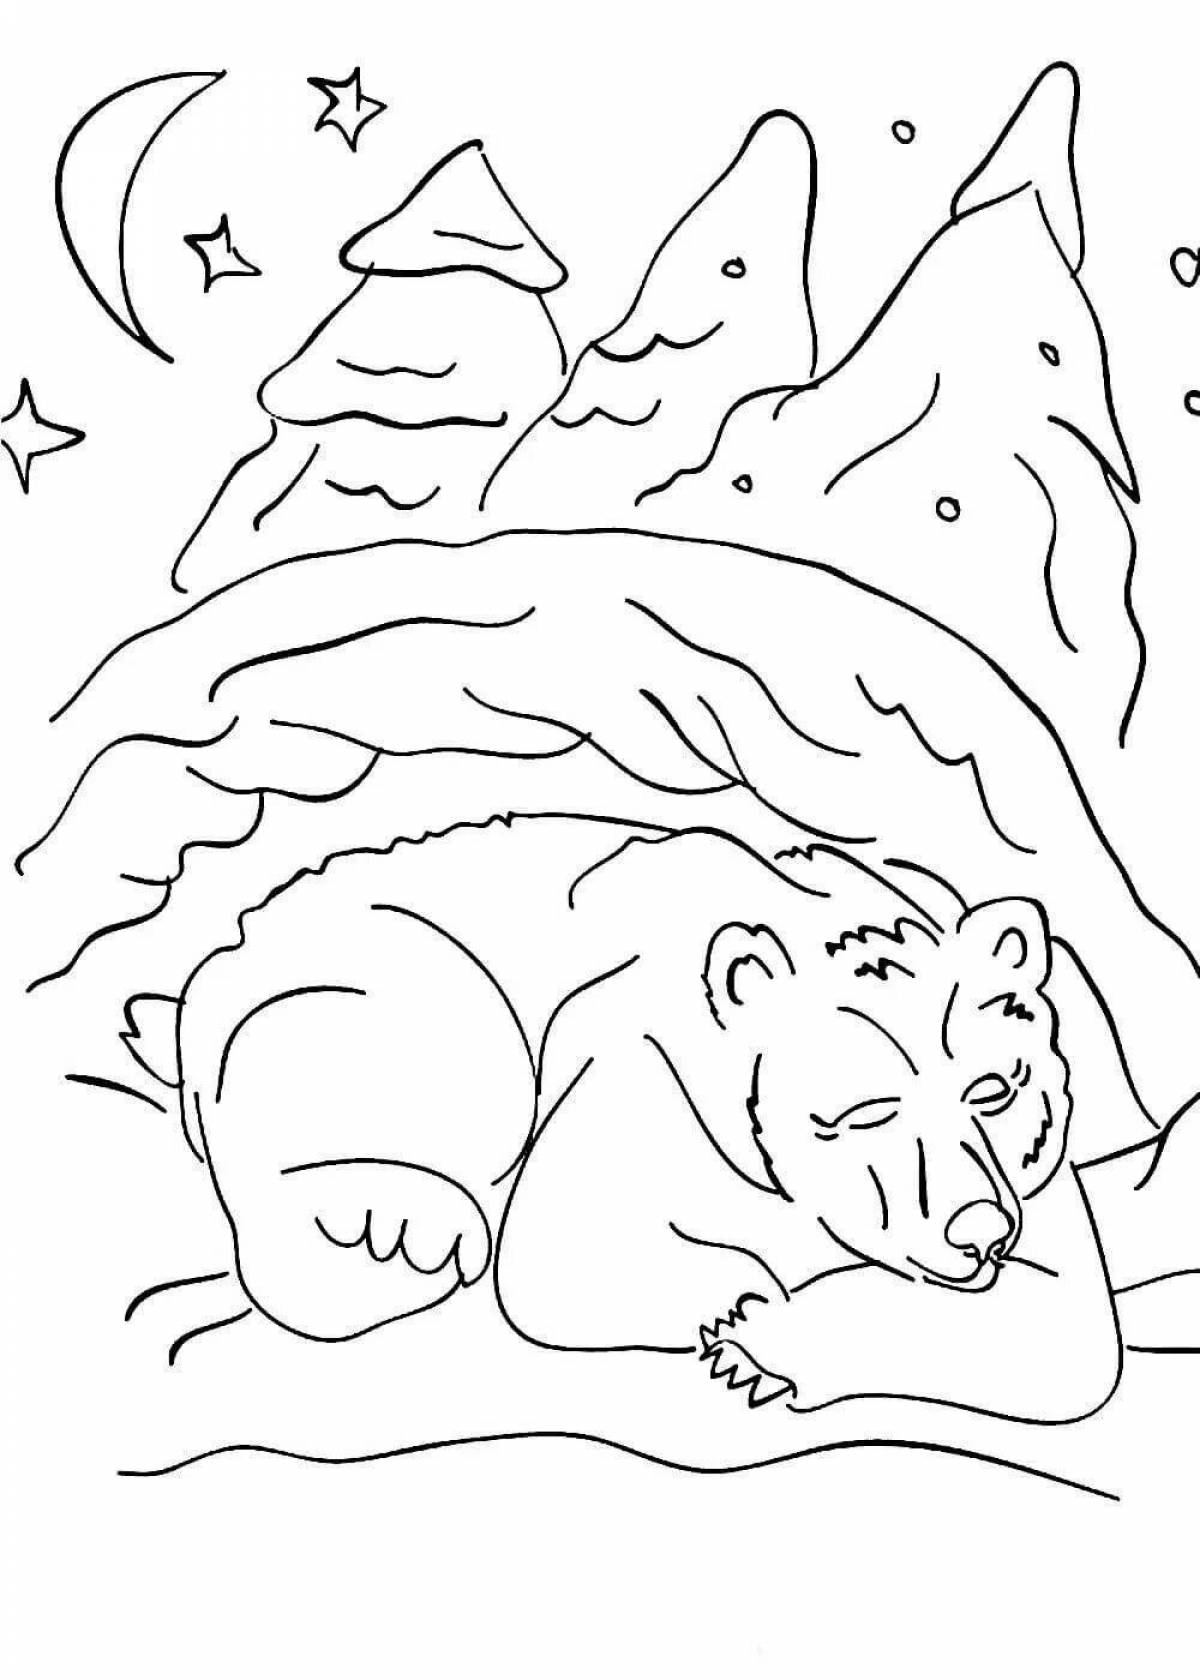 Cute bear in the den coloring book for kids